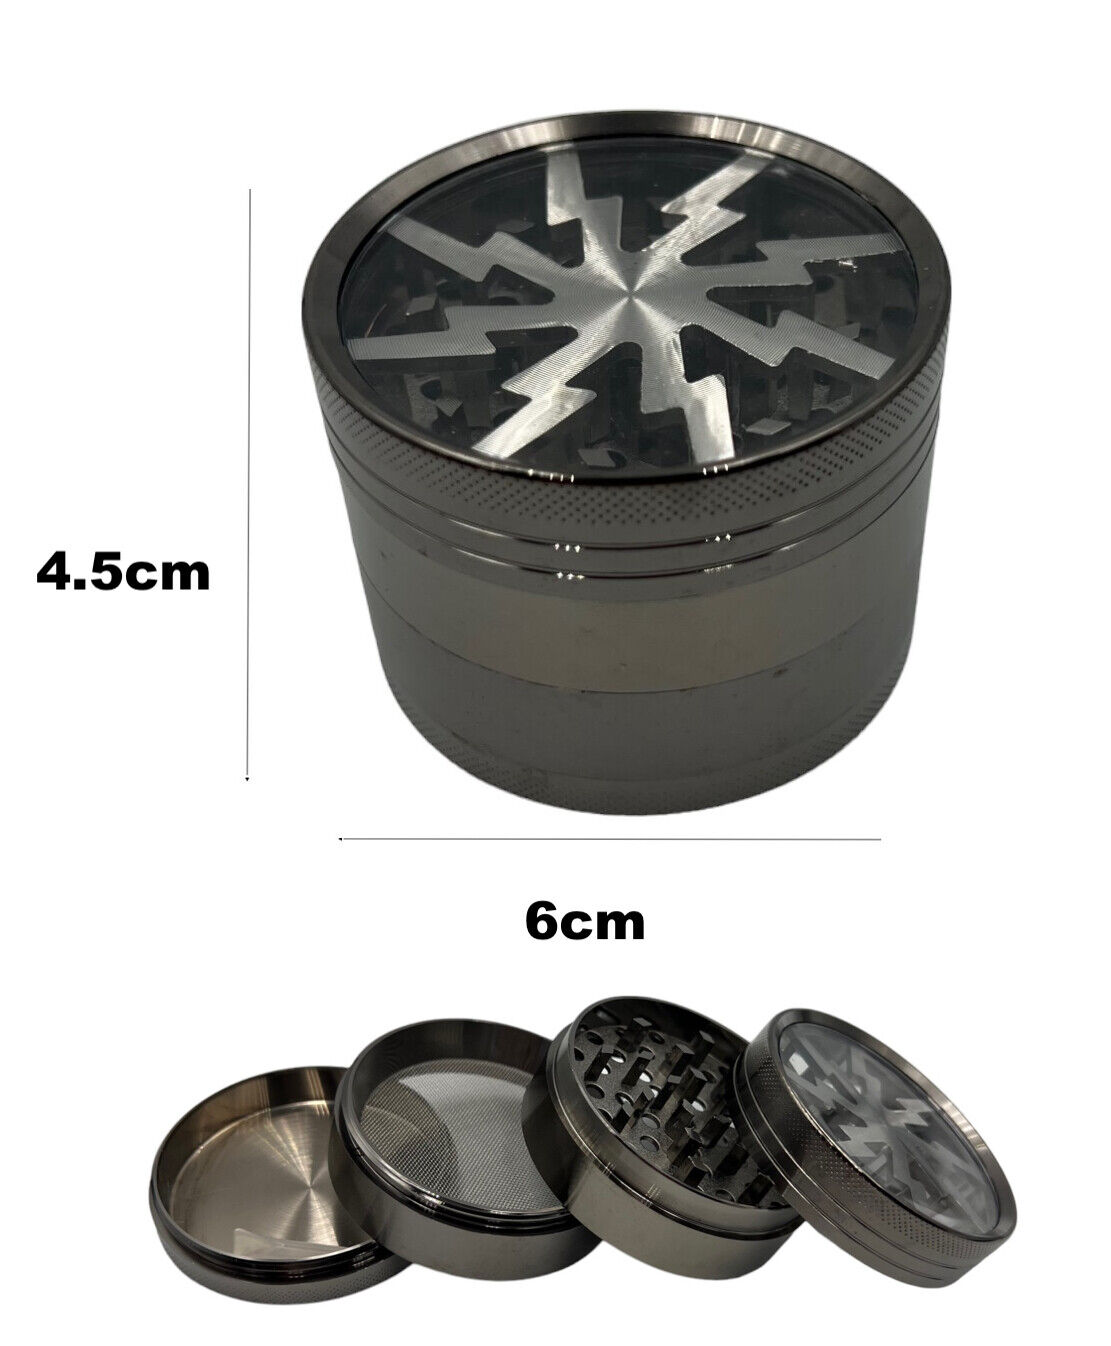 Large 6cm Charcoal Herb Grinder 4 Layers Smoke Spice Tobacco Metal Crusher